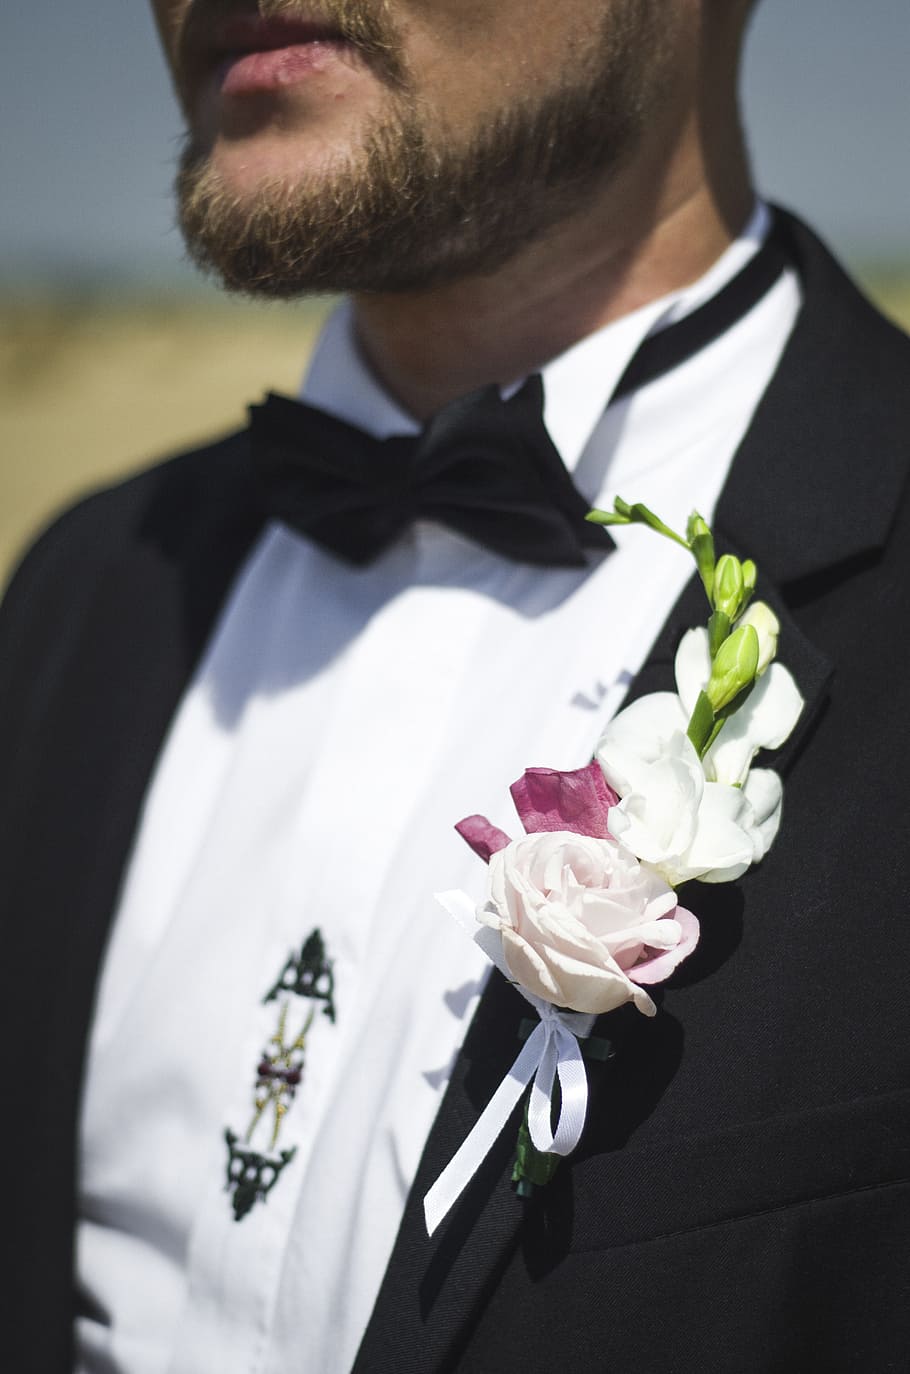 wedding, flower, bred, flowering plant, one person, bow tie